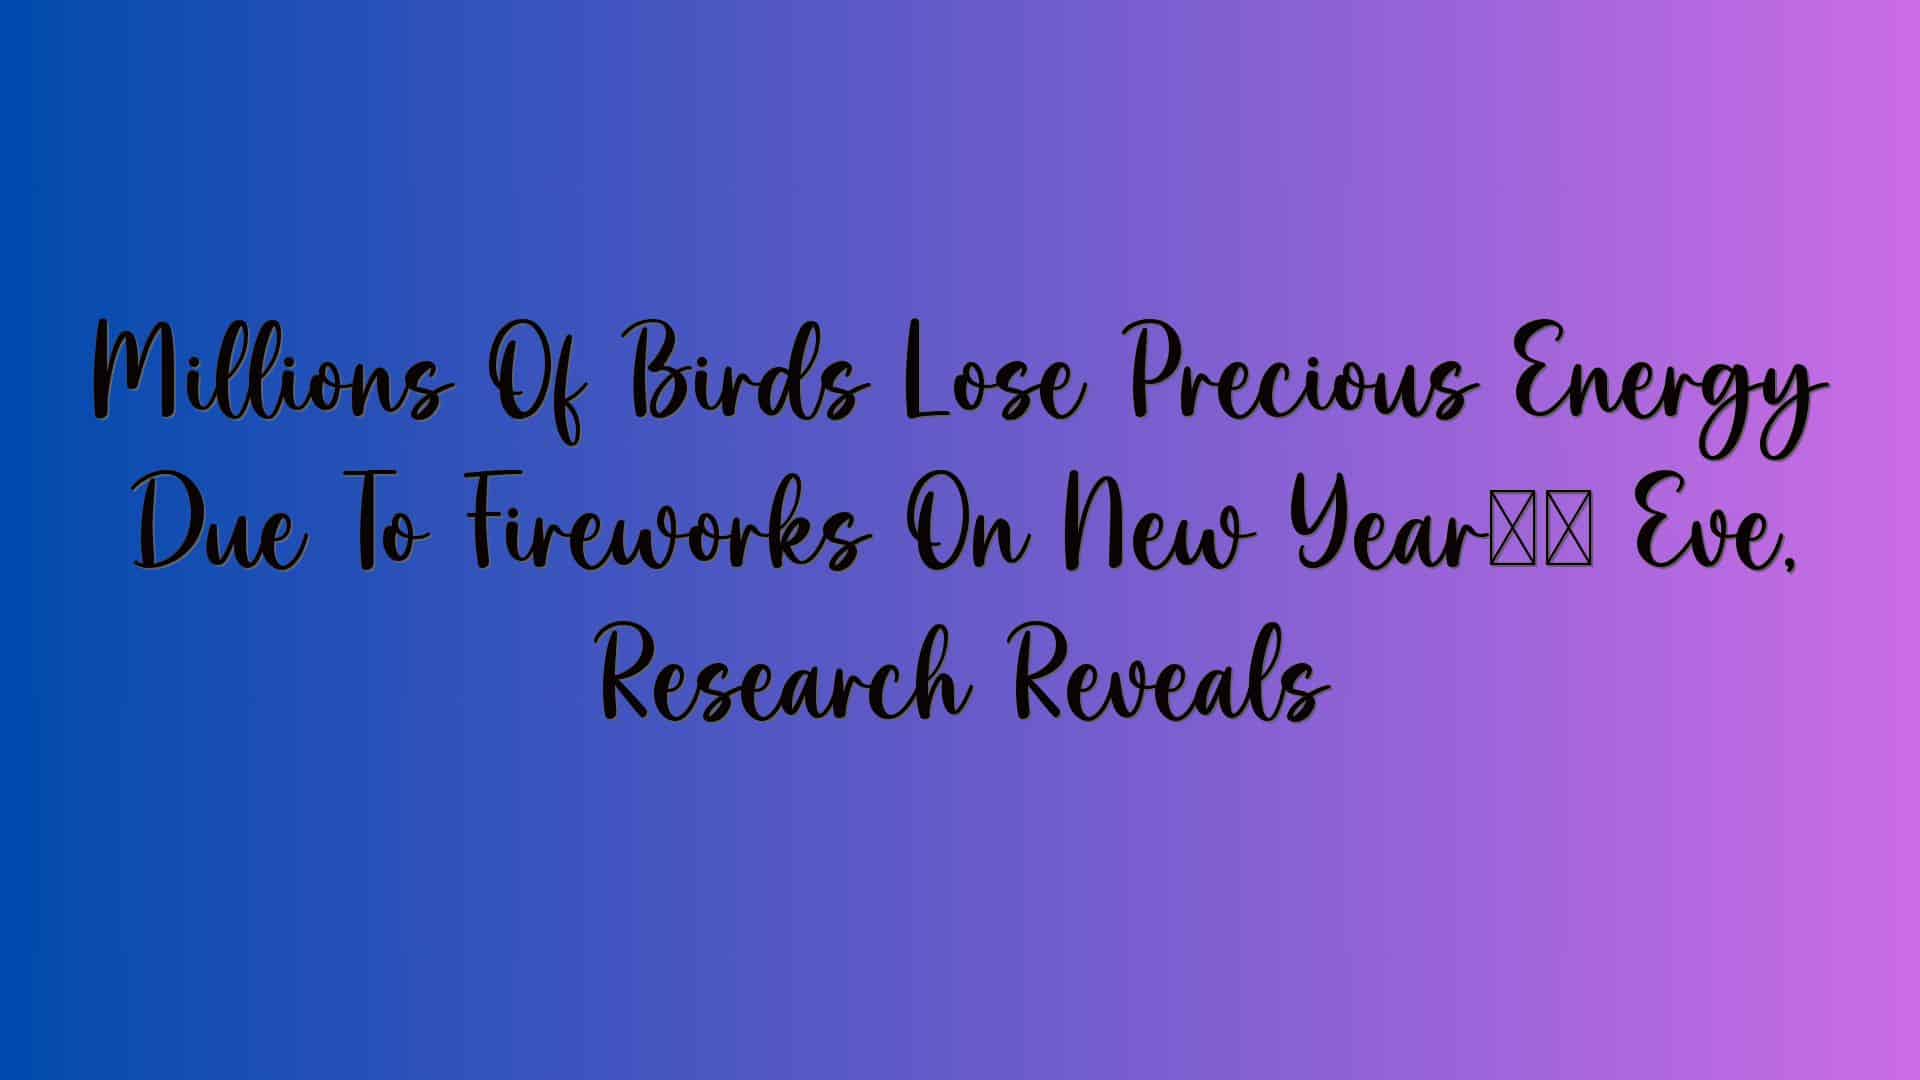 Millions Of Birds Lose Precious Energy Due To Fireworks On New Year’s Eve, Research Reveals